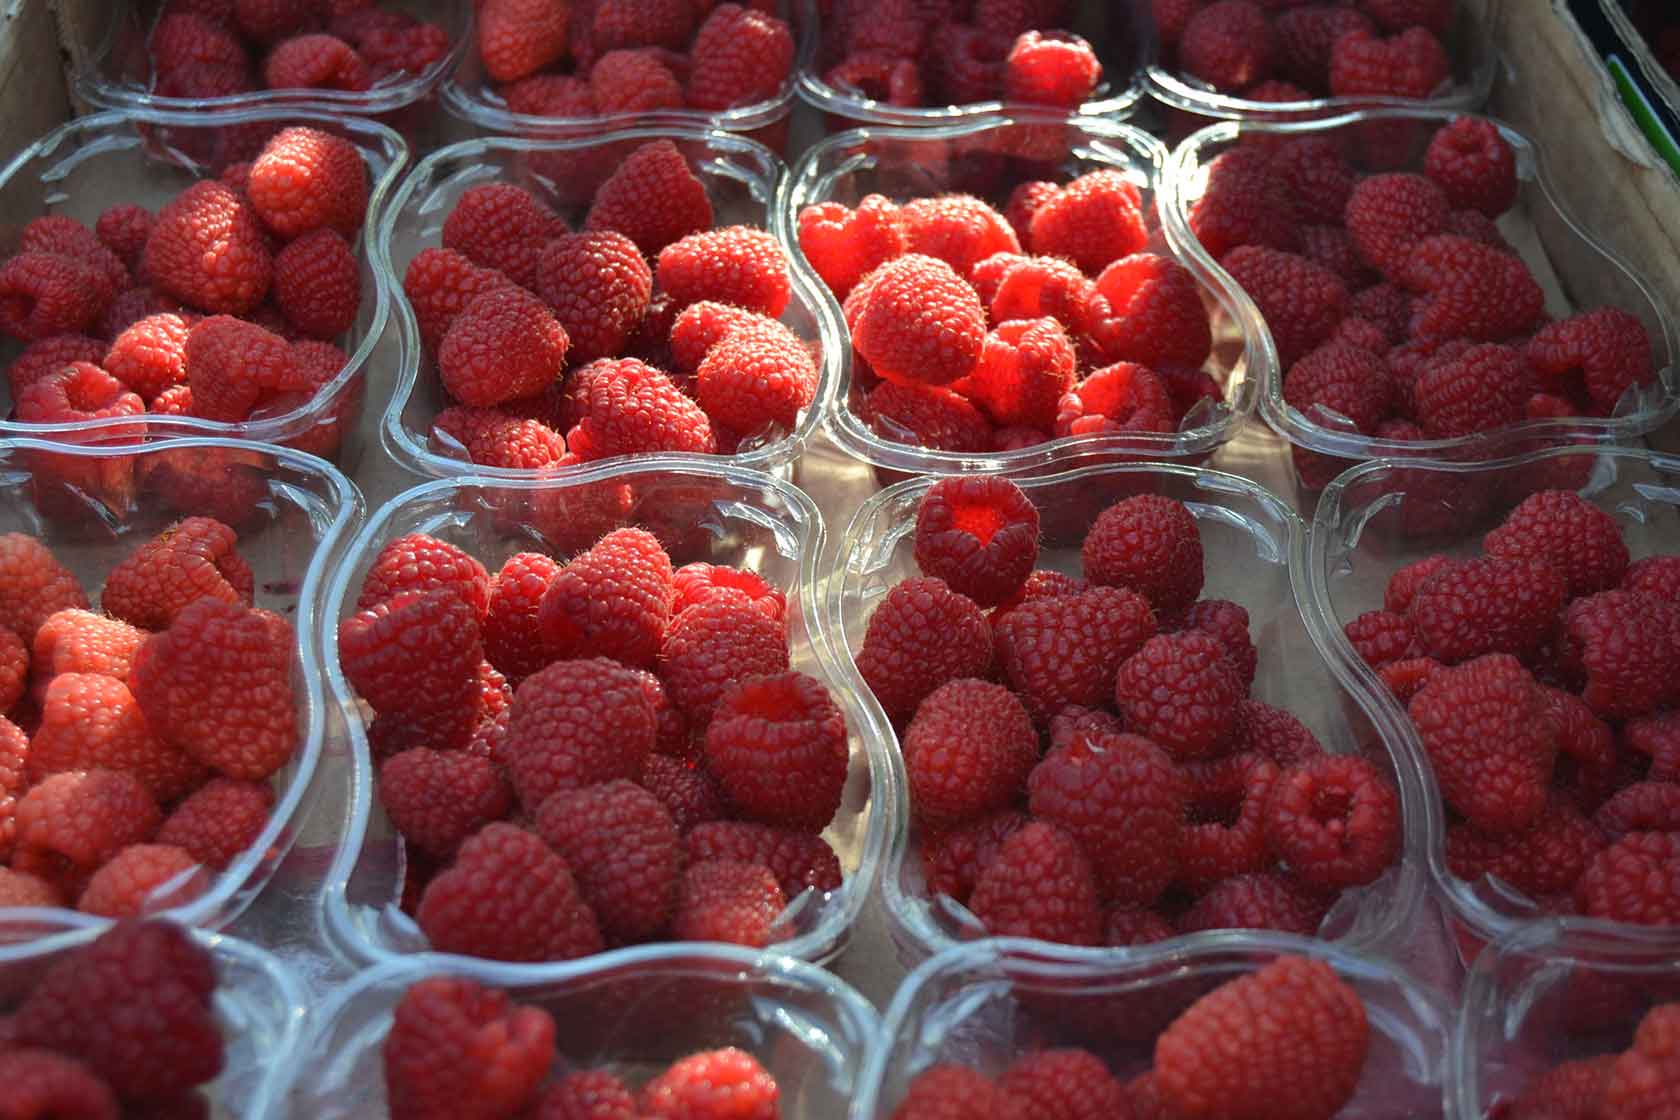 raspberries in a hydroponic cultivation vessel